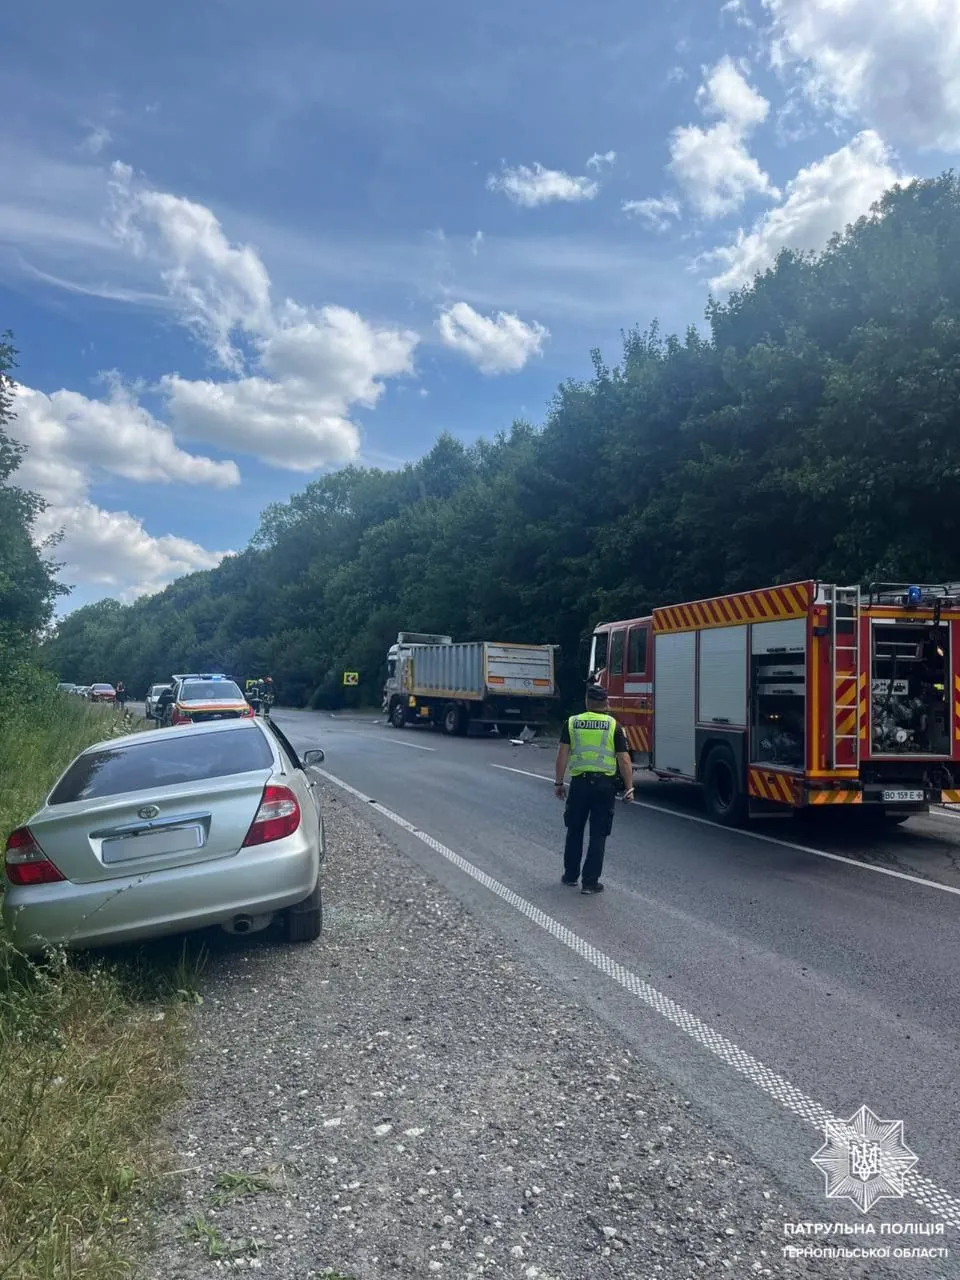 an-accident-with-injuries-occurred-on-a-highway-in-ternopil-region-traffic-is-hampered